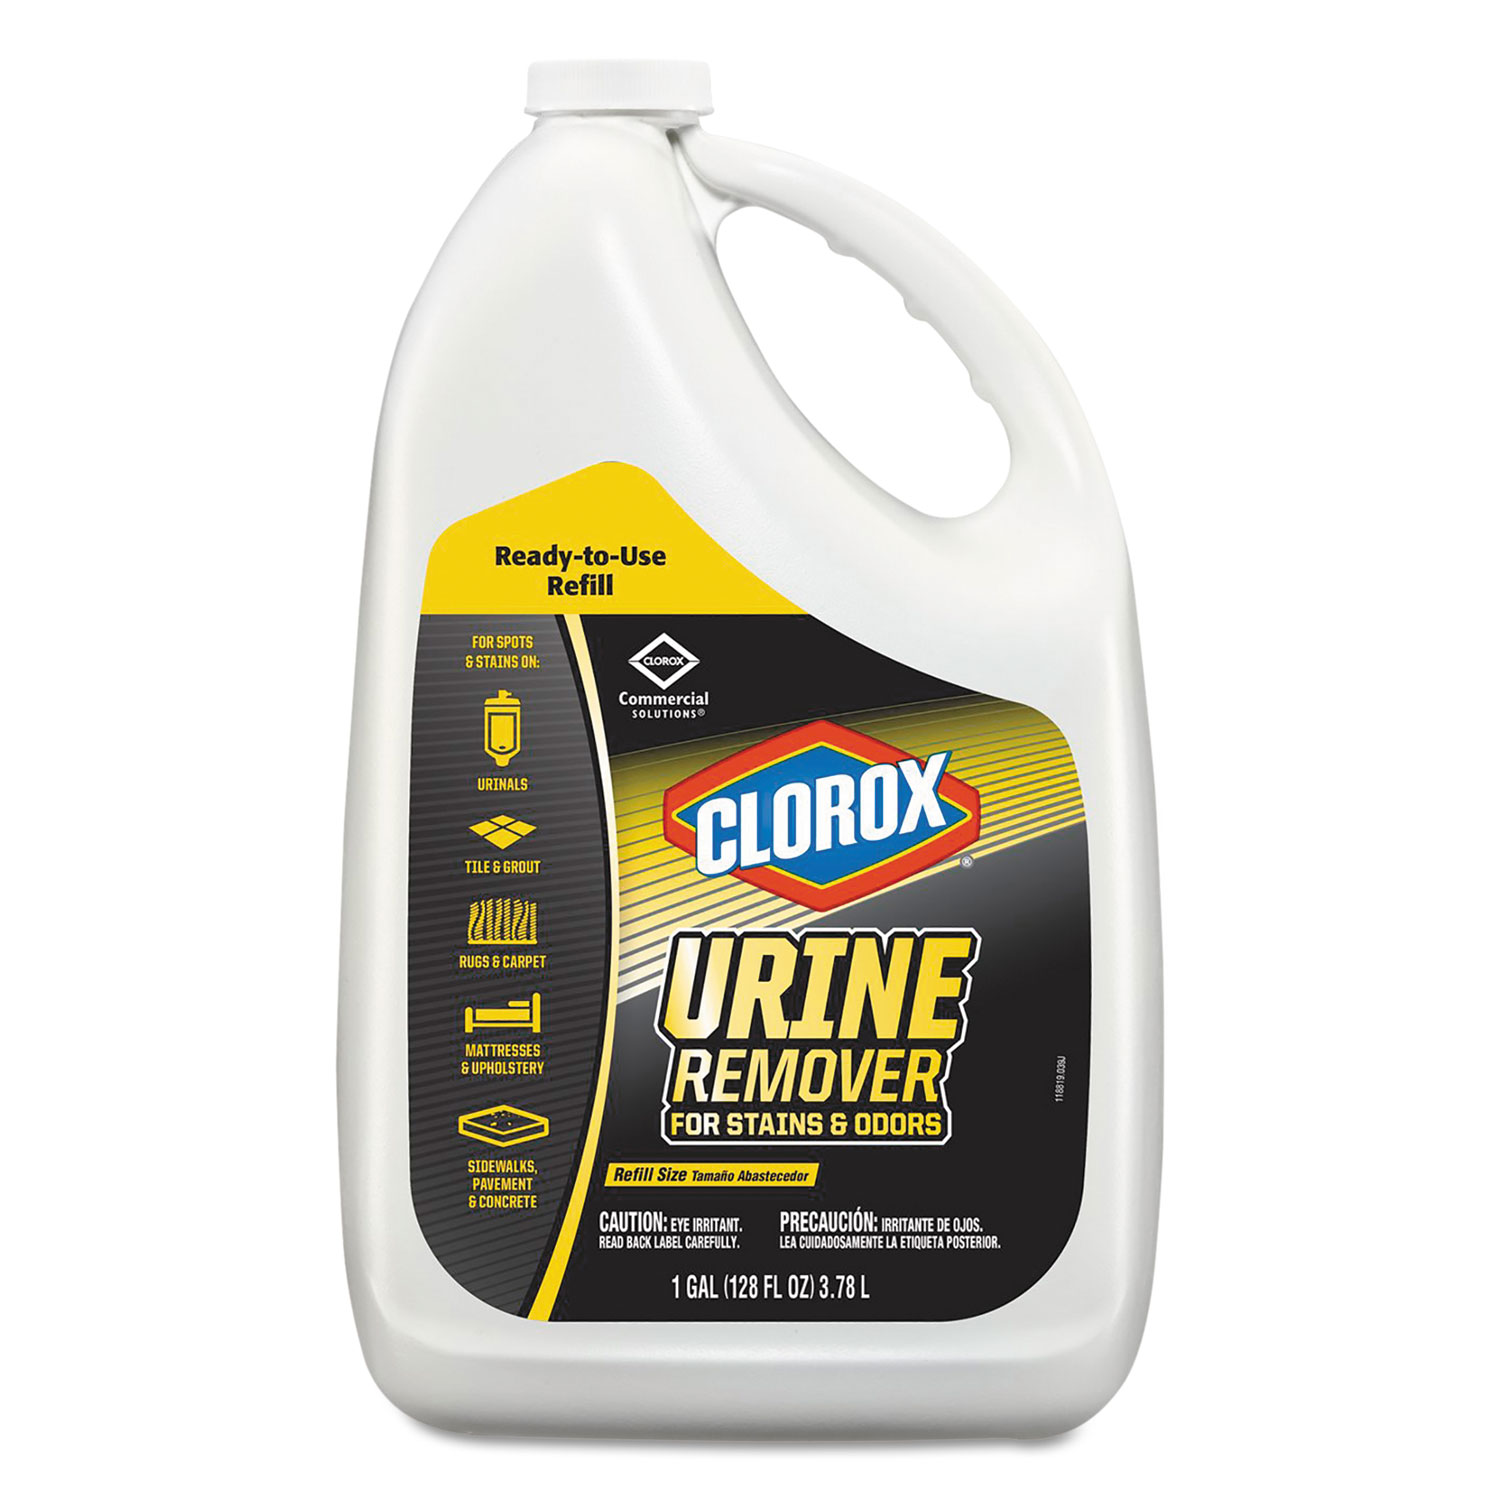  Clorox 31351EA Urine Remover for Stains and Odors, 128 oz Refill Bottle (CLO31351EA) 